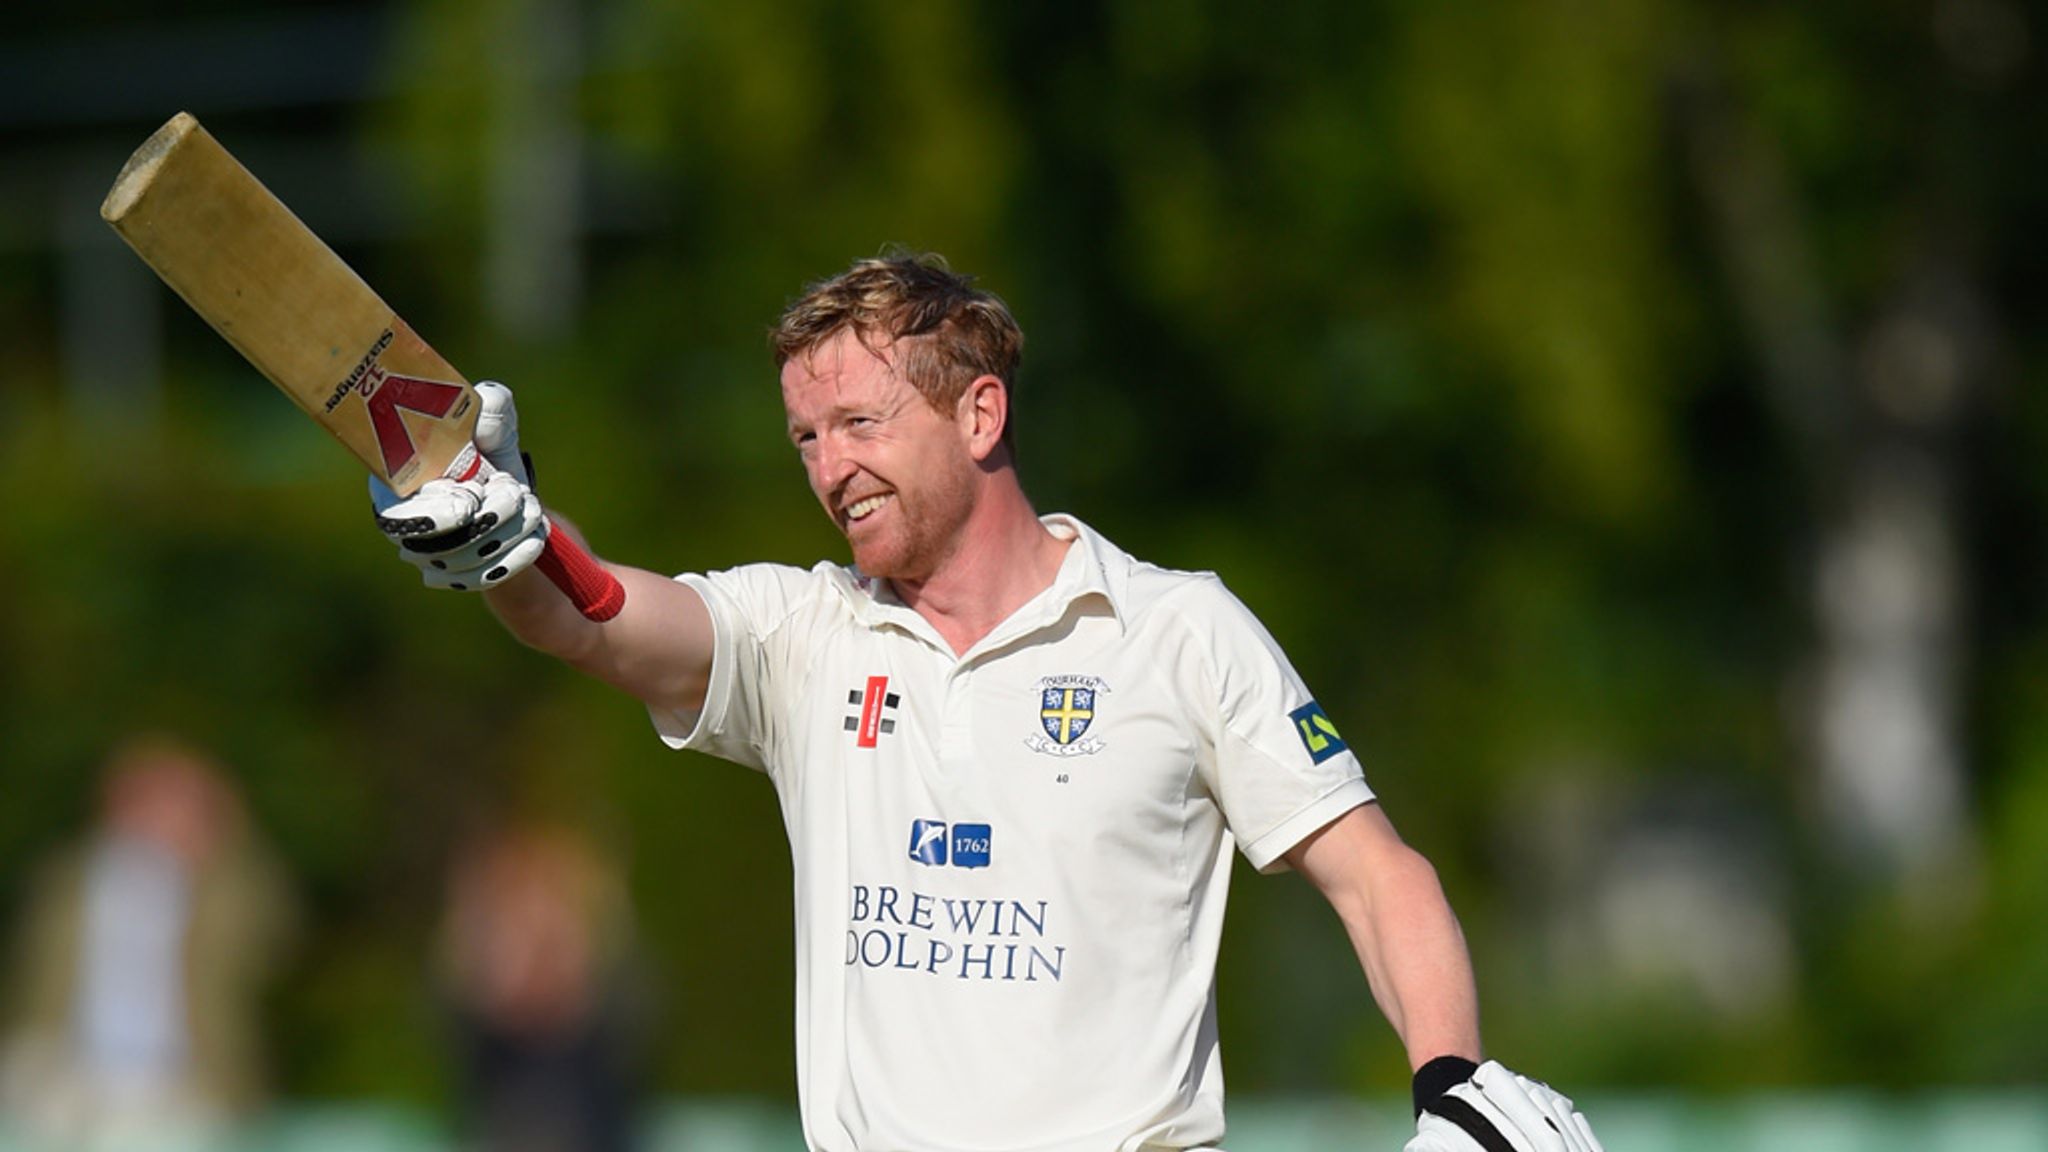 Durham captain Paul Collingwood signs a new deal | Cricket News | Sky Sports